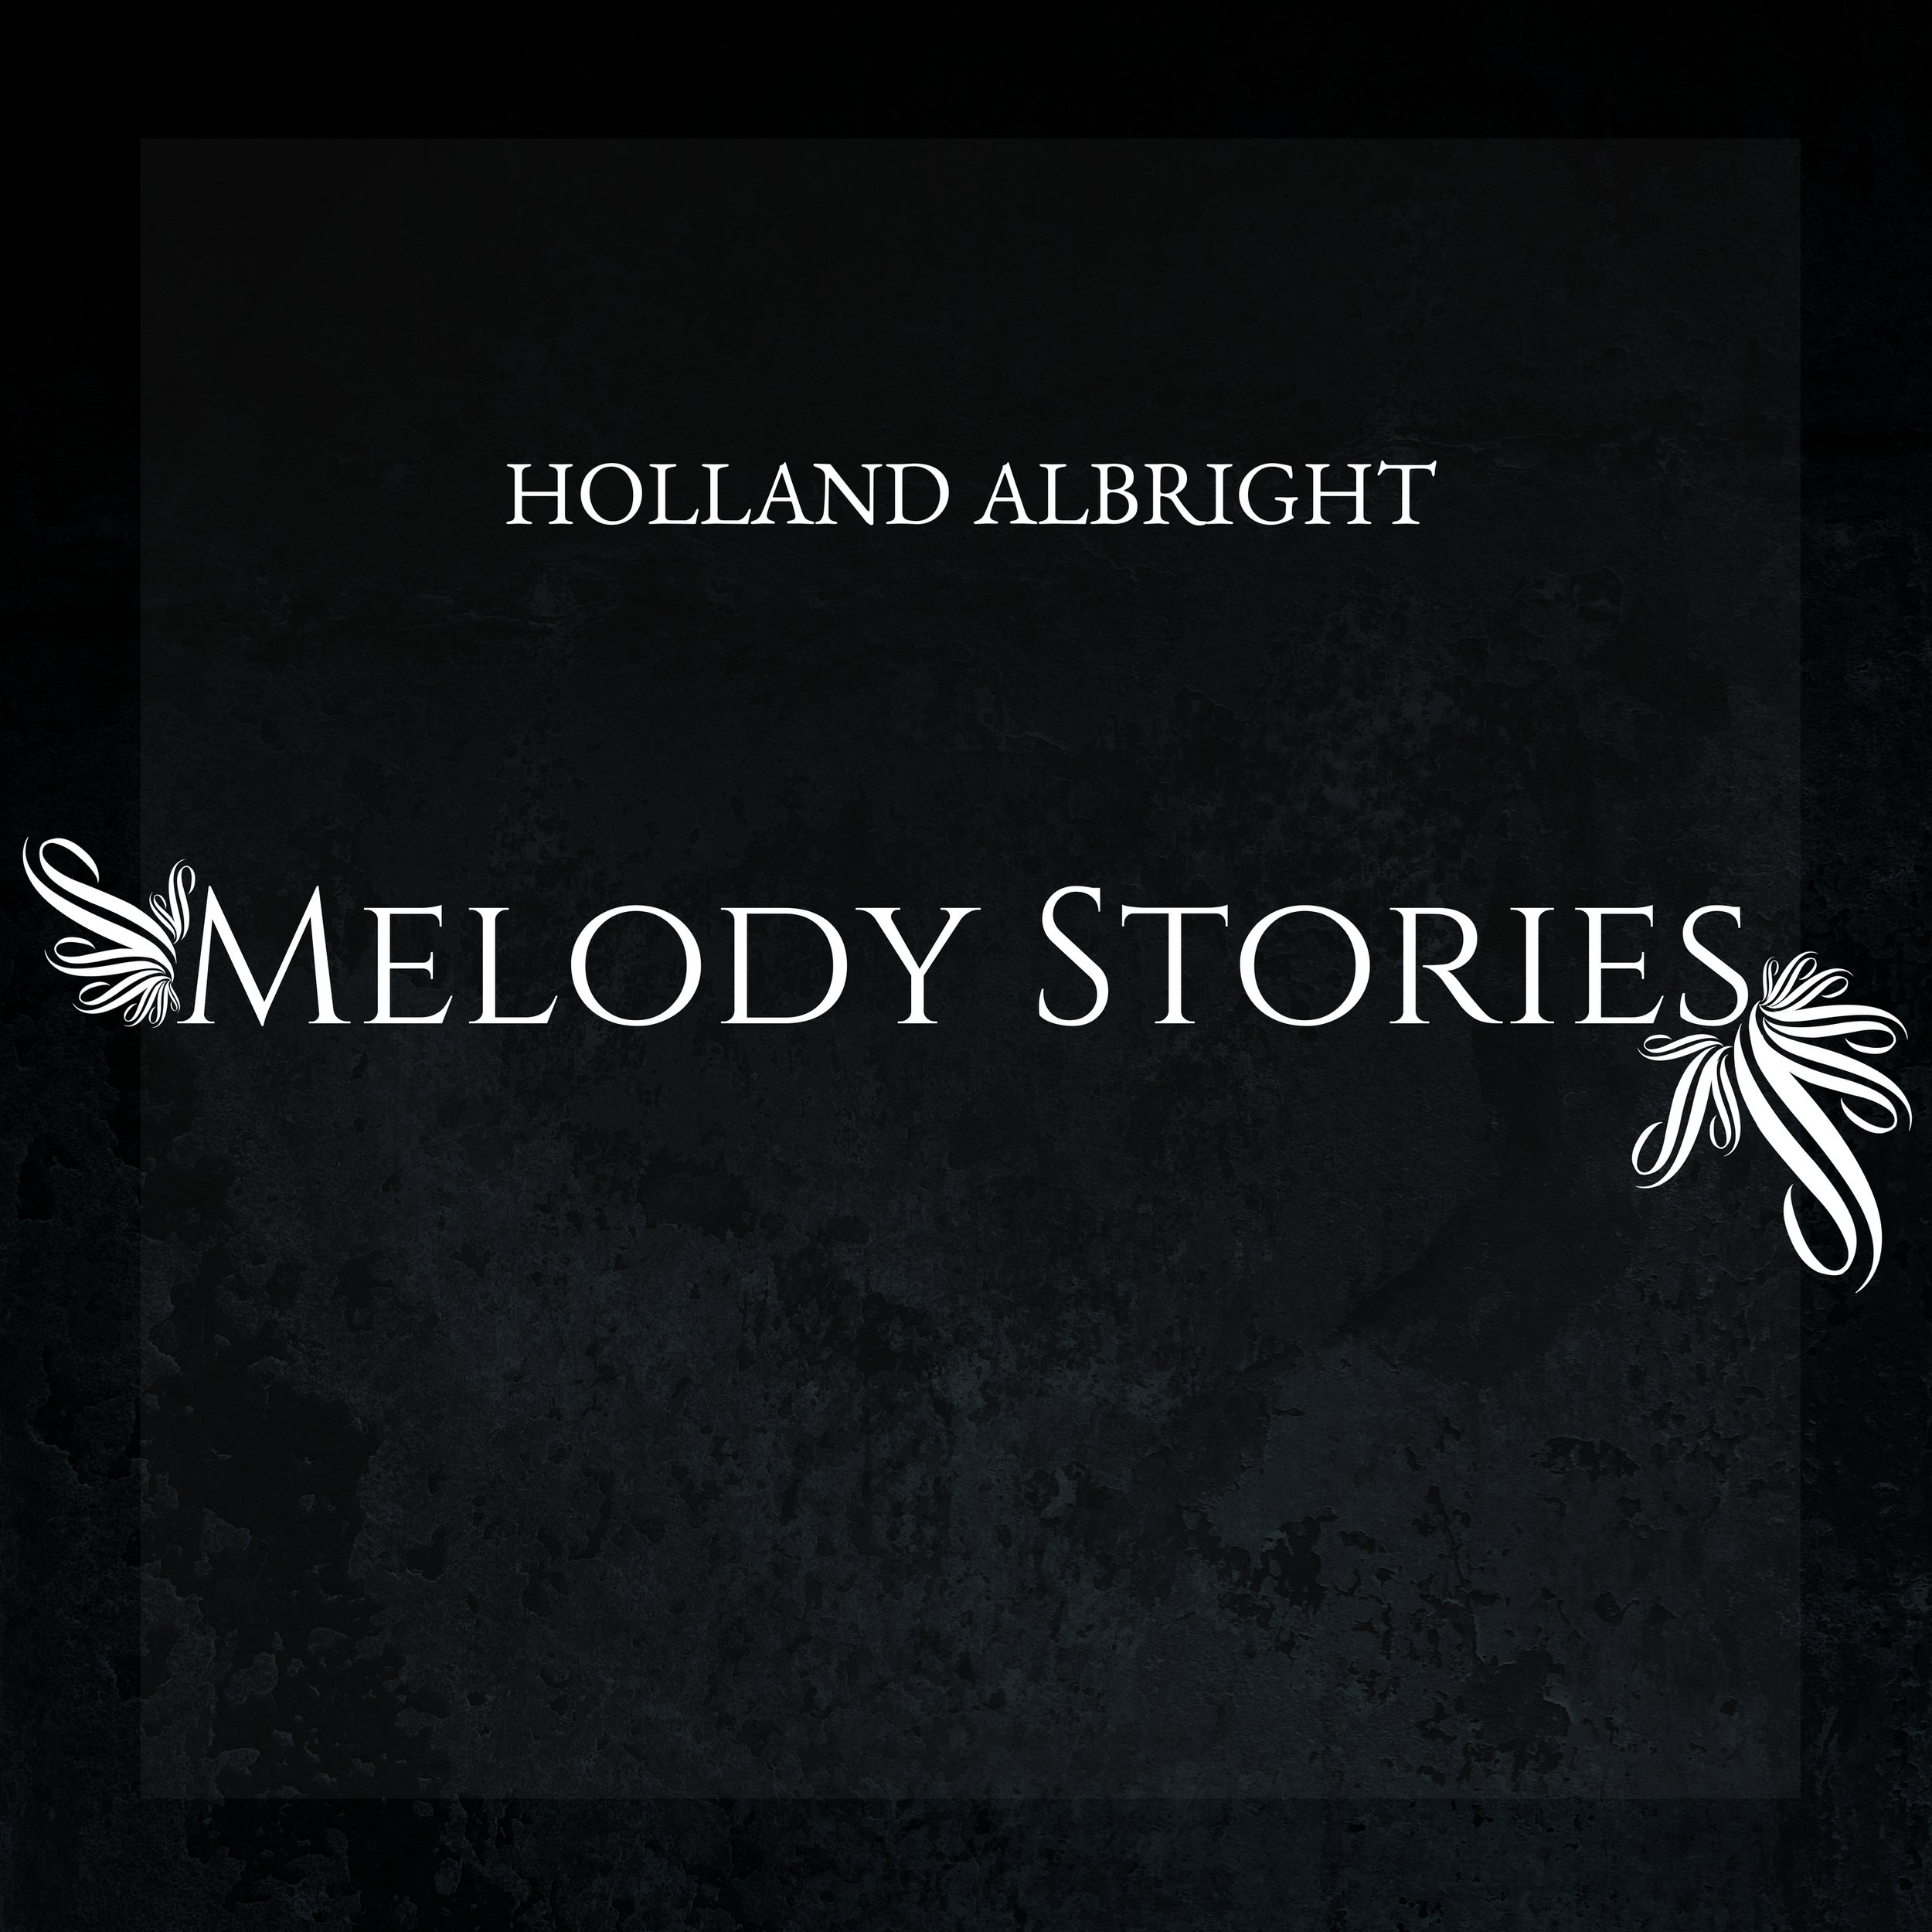 Melody Stories